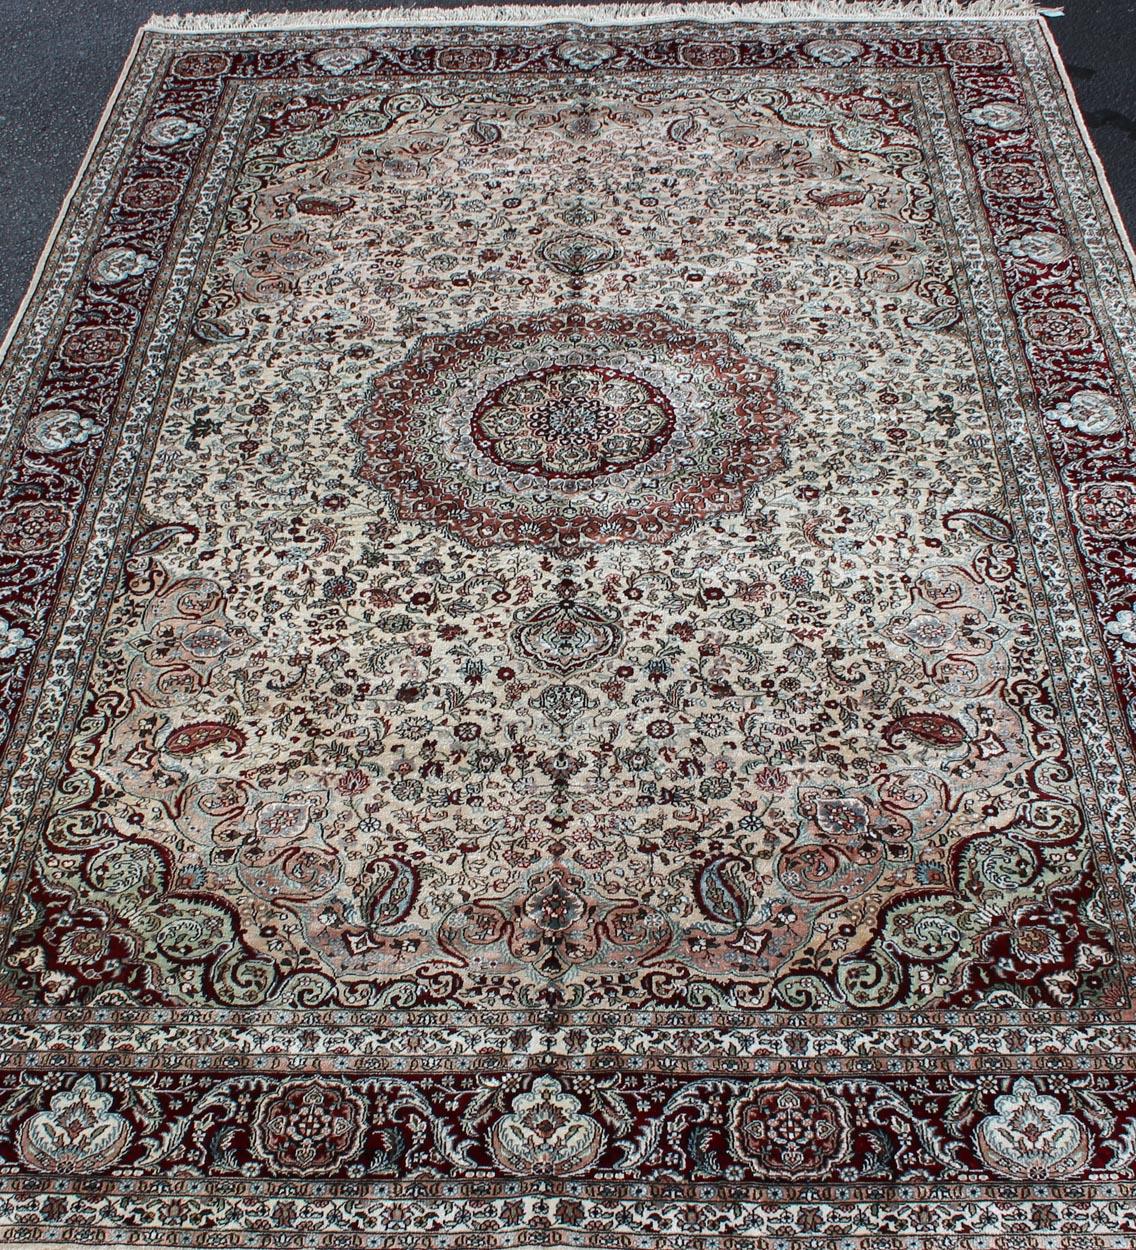 20th Century Silk Vintage Isfahan Design Medallion Carpet with Intricate Floral Elements For Sale